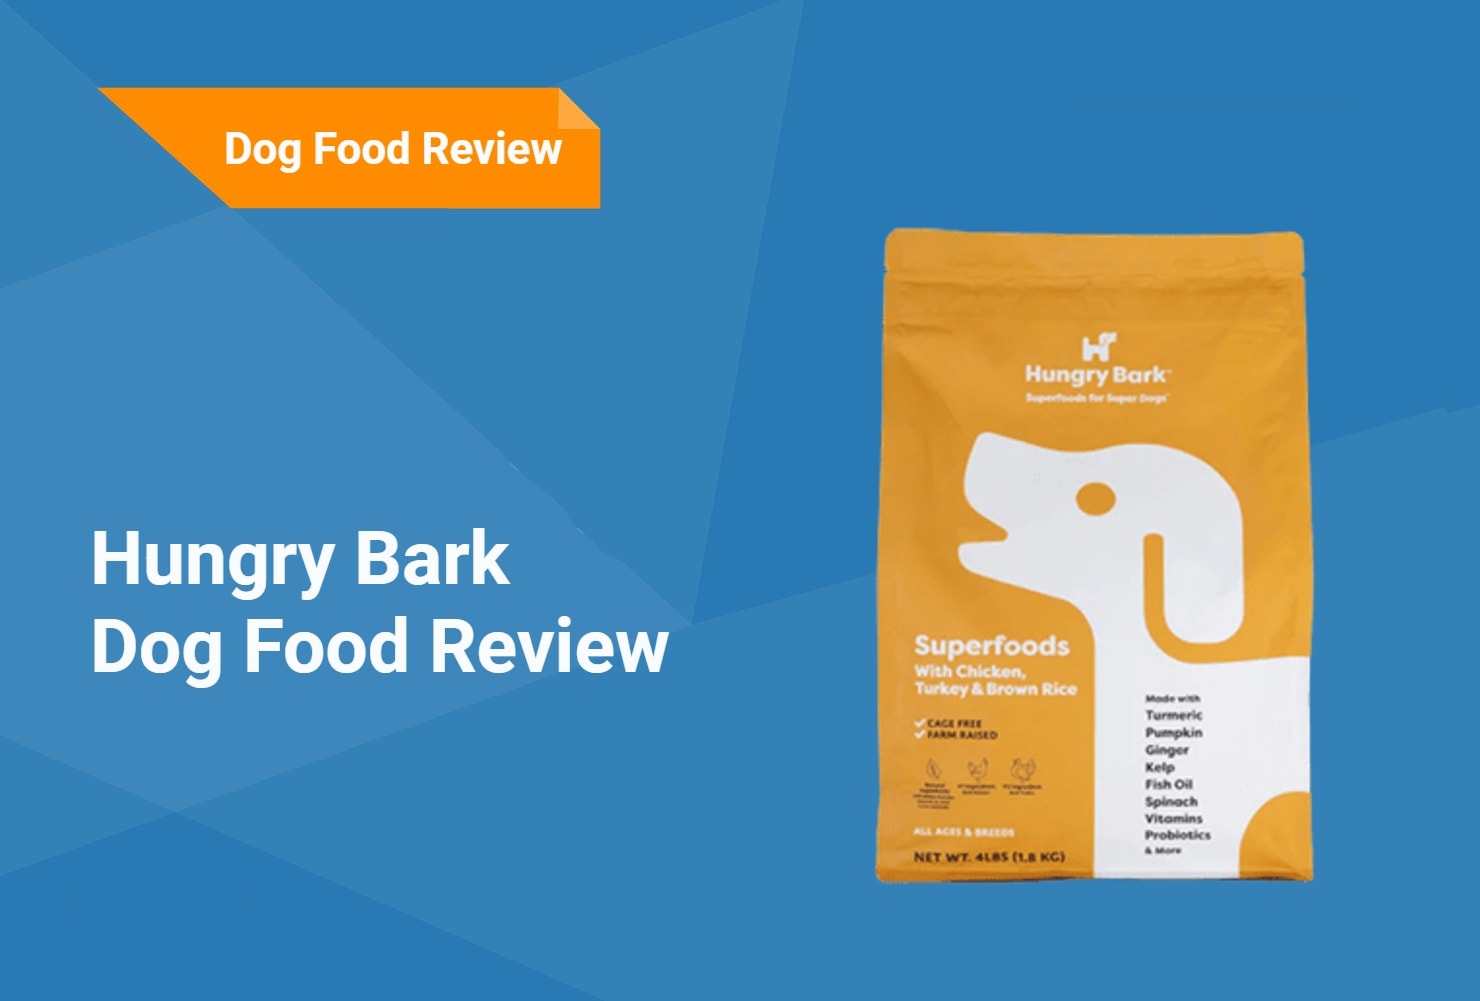 Hungry bark Dog Food Review